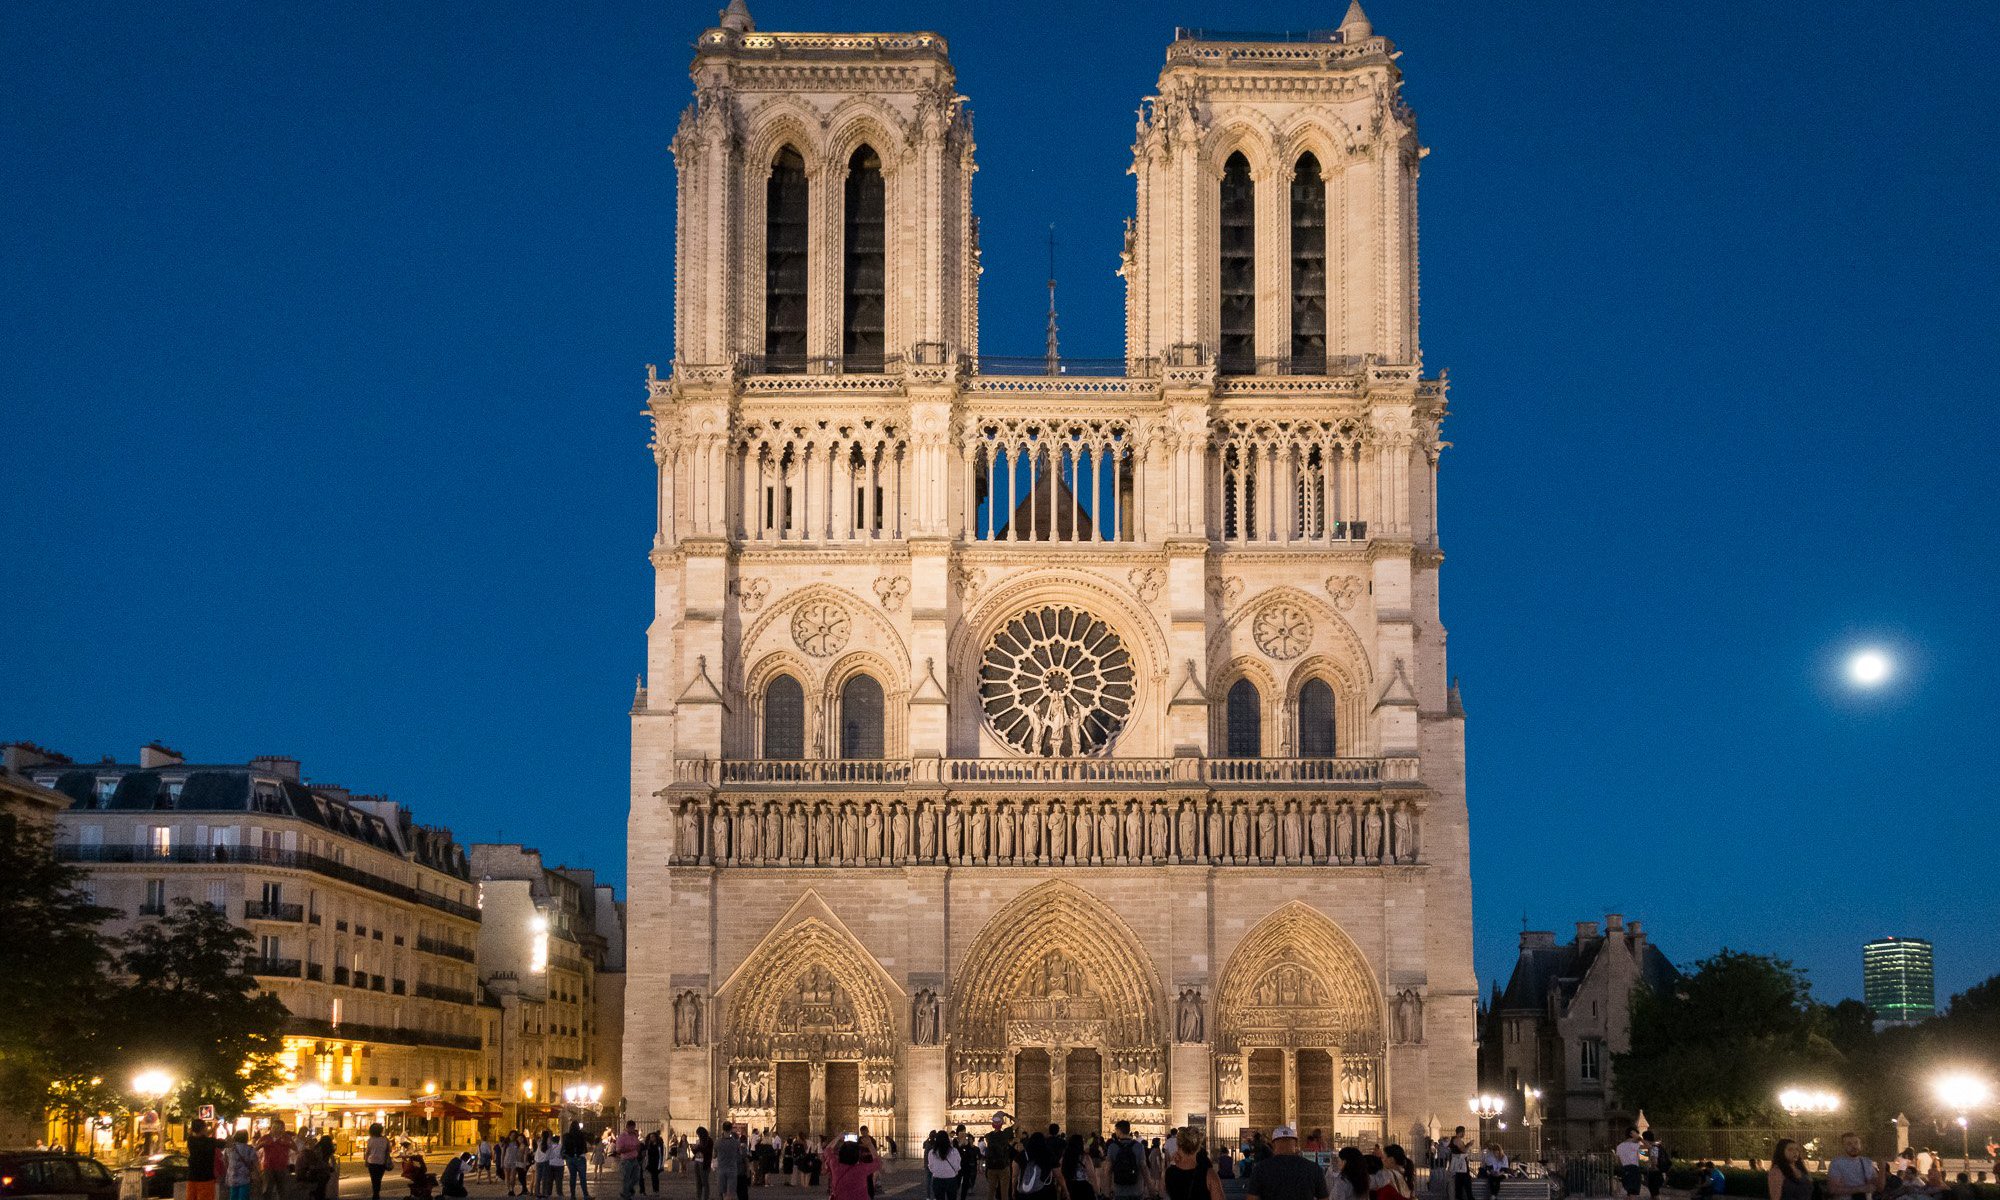 Notre Dame Cathedral at dusk - Ed O'Keeffe Photography